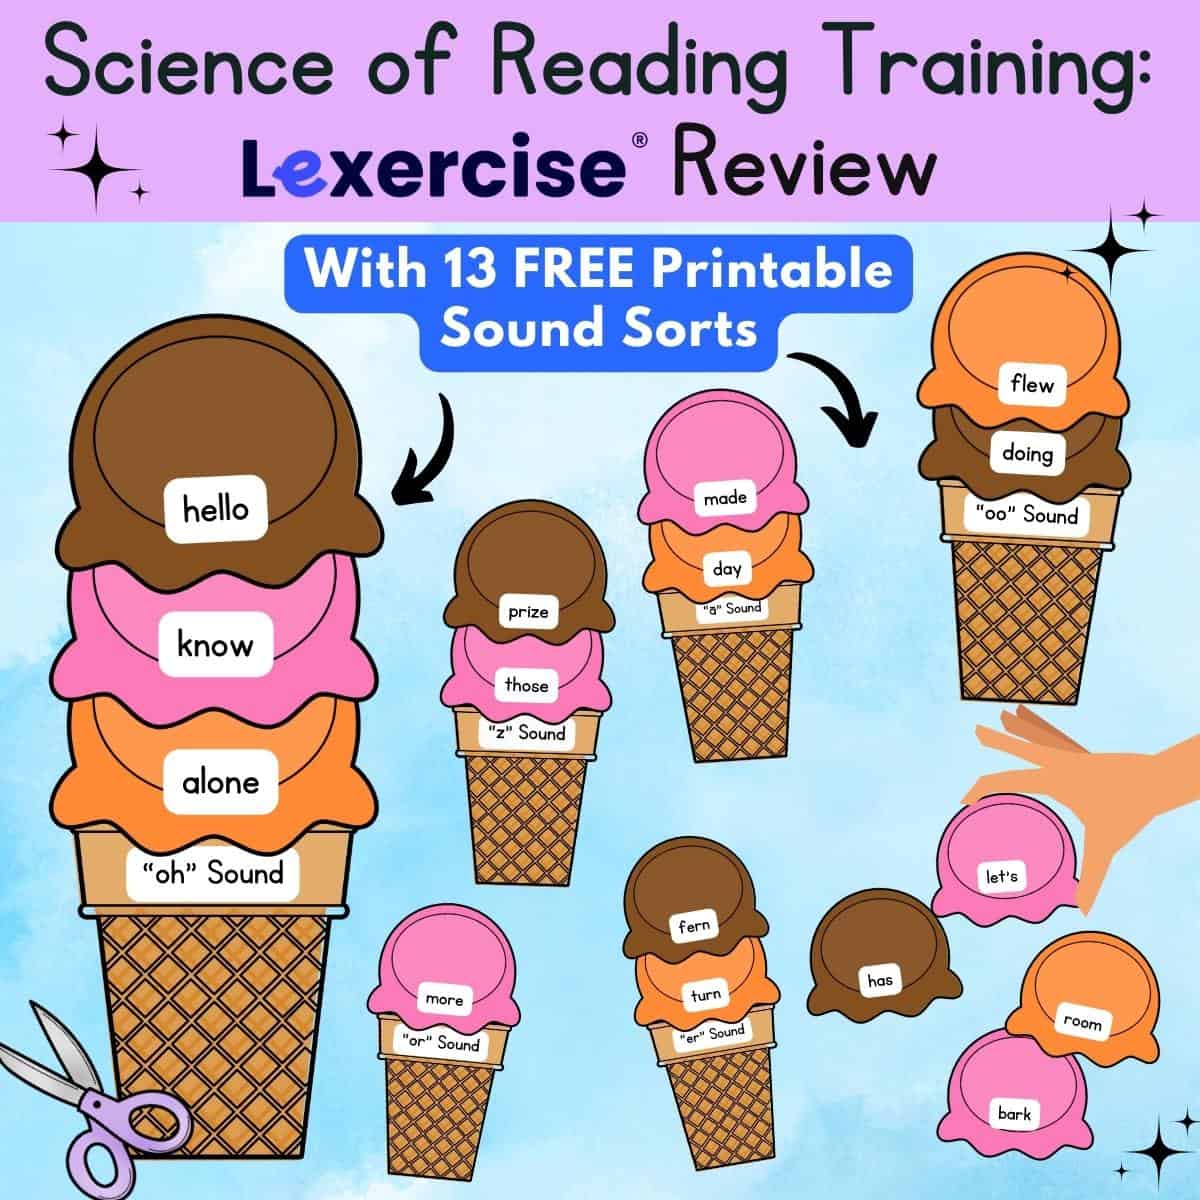 Colorful graphic showing Science of Reading Lexercise' Training with printable ice cream cone activity. 